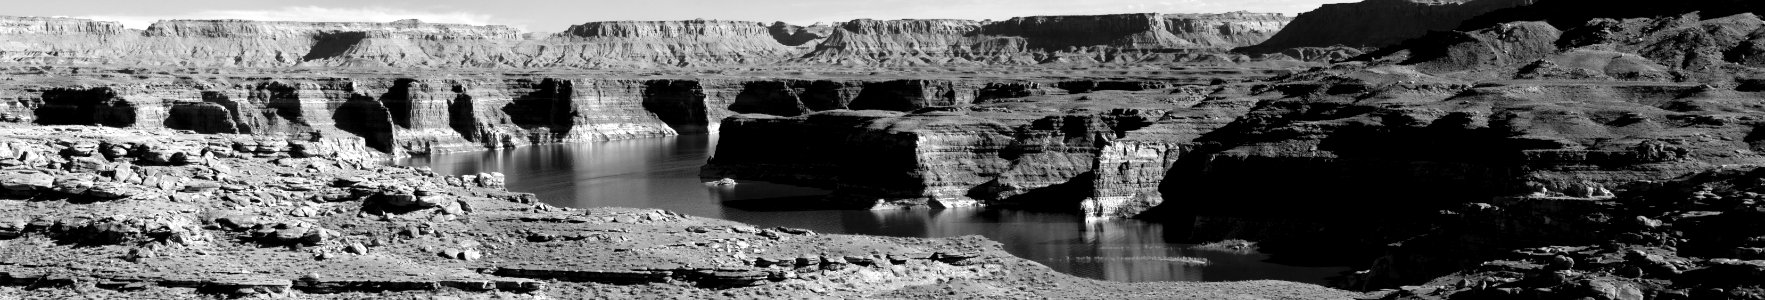 Grayscale Photo Of Canyon